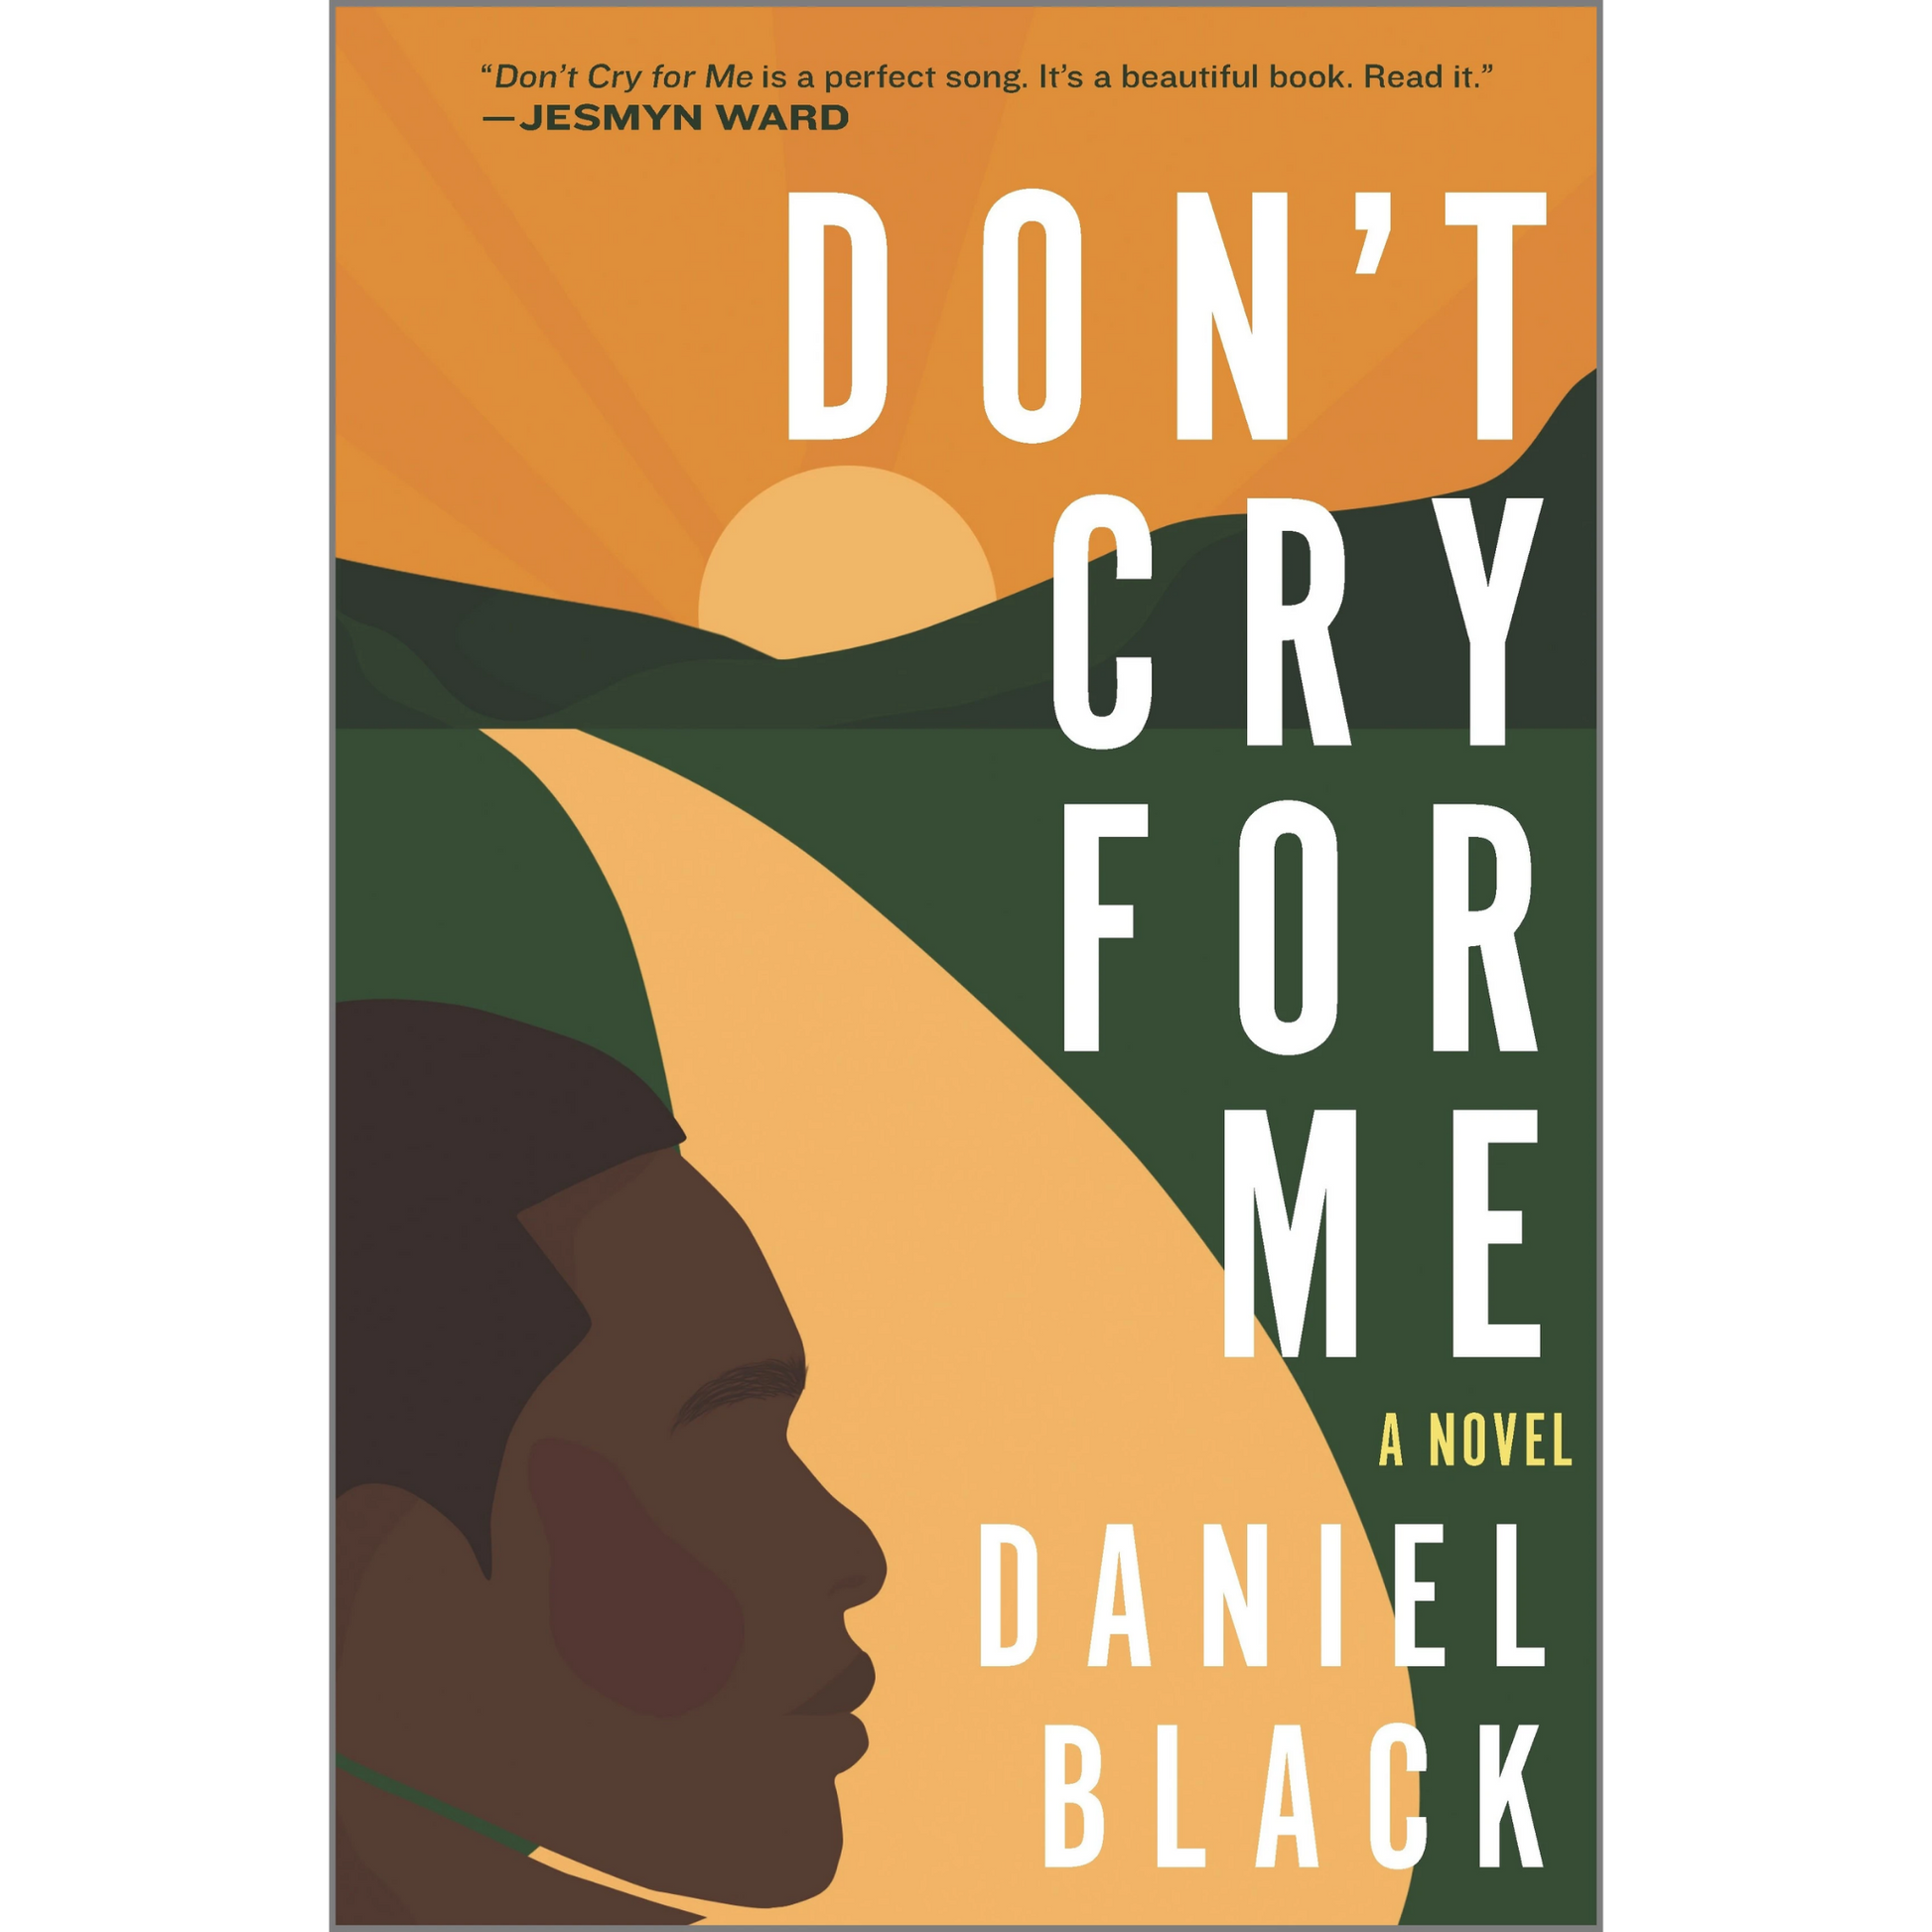 dont cry for me daniel black